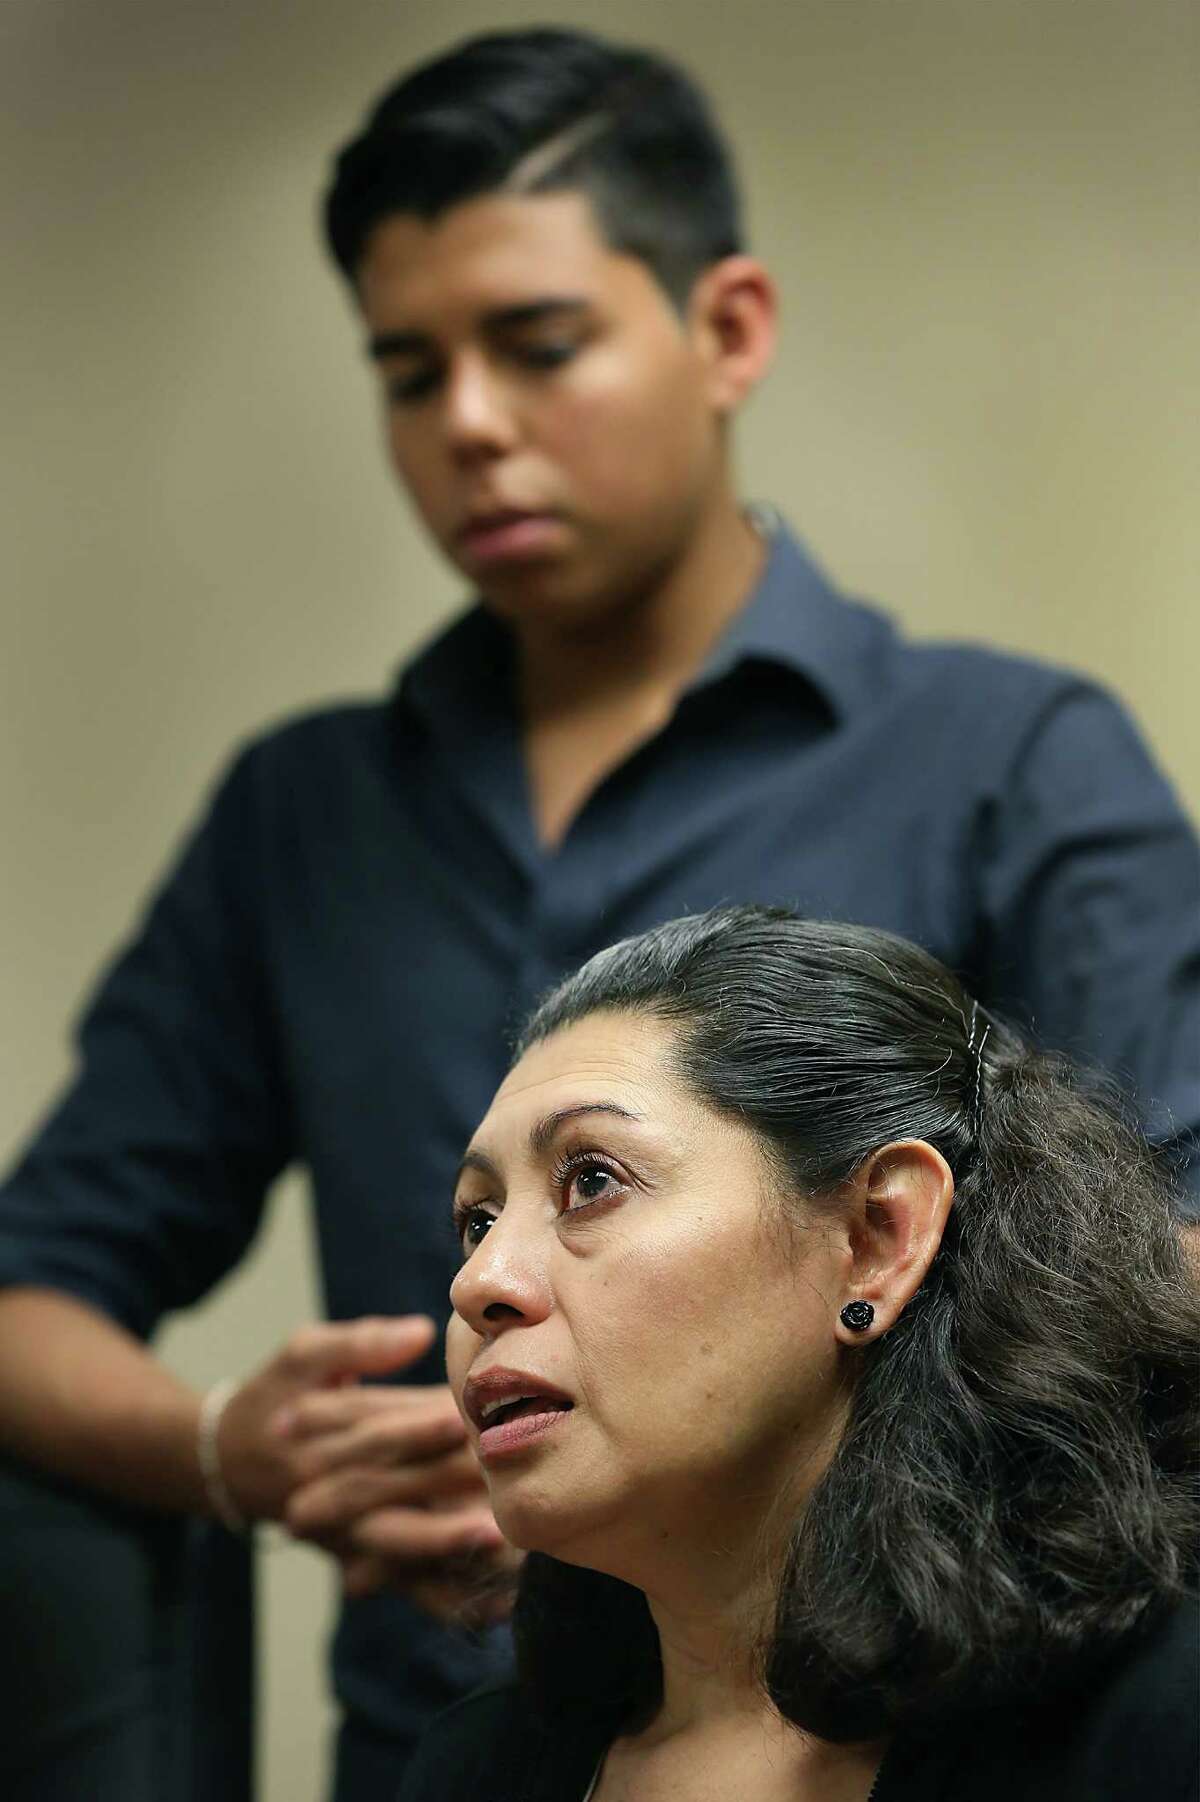 Lesly Cabrera, below, a Honduran mother who is seeking asylum here due to violence aimed at her 17 year-old son Edwuard, above, while they lived in San Pedro Sula, was denied application for asylum in immigration court on Monday, May 18, 2015. Her son Edwuard has a separate case and hopes to gain residency.